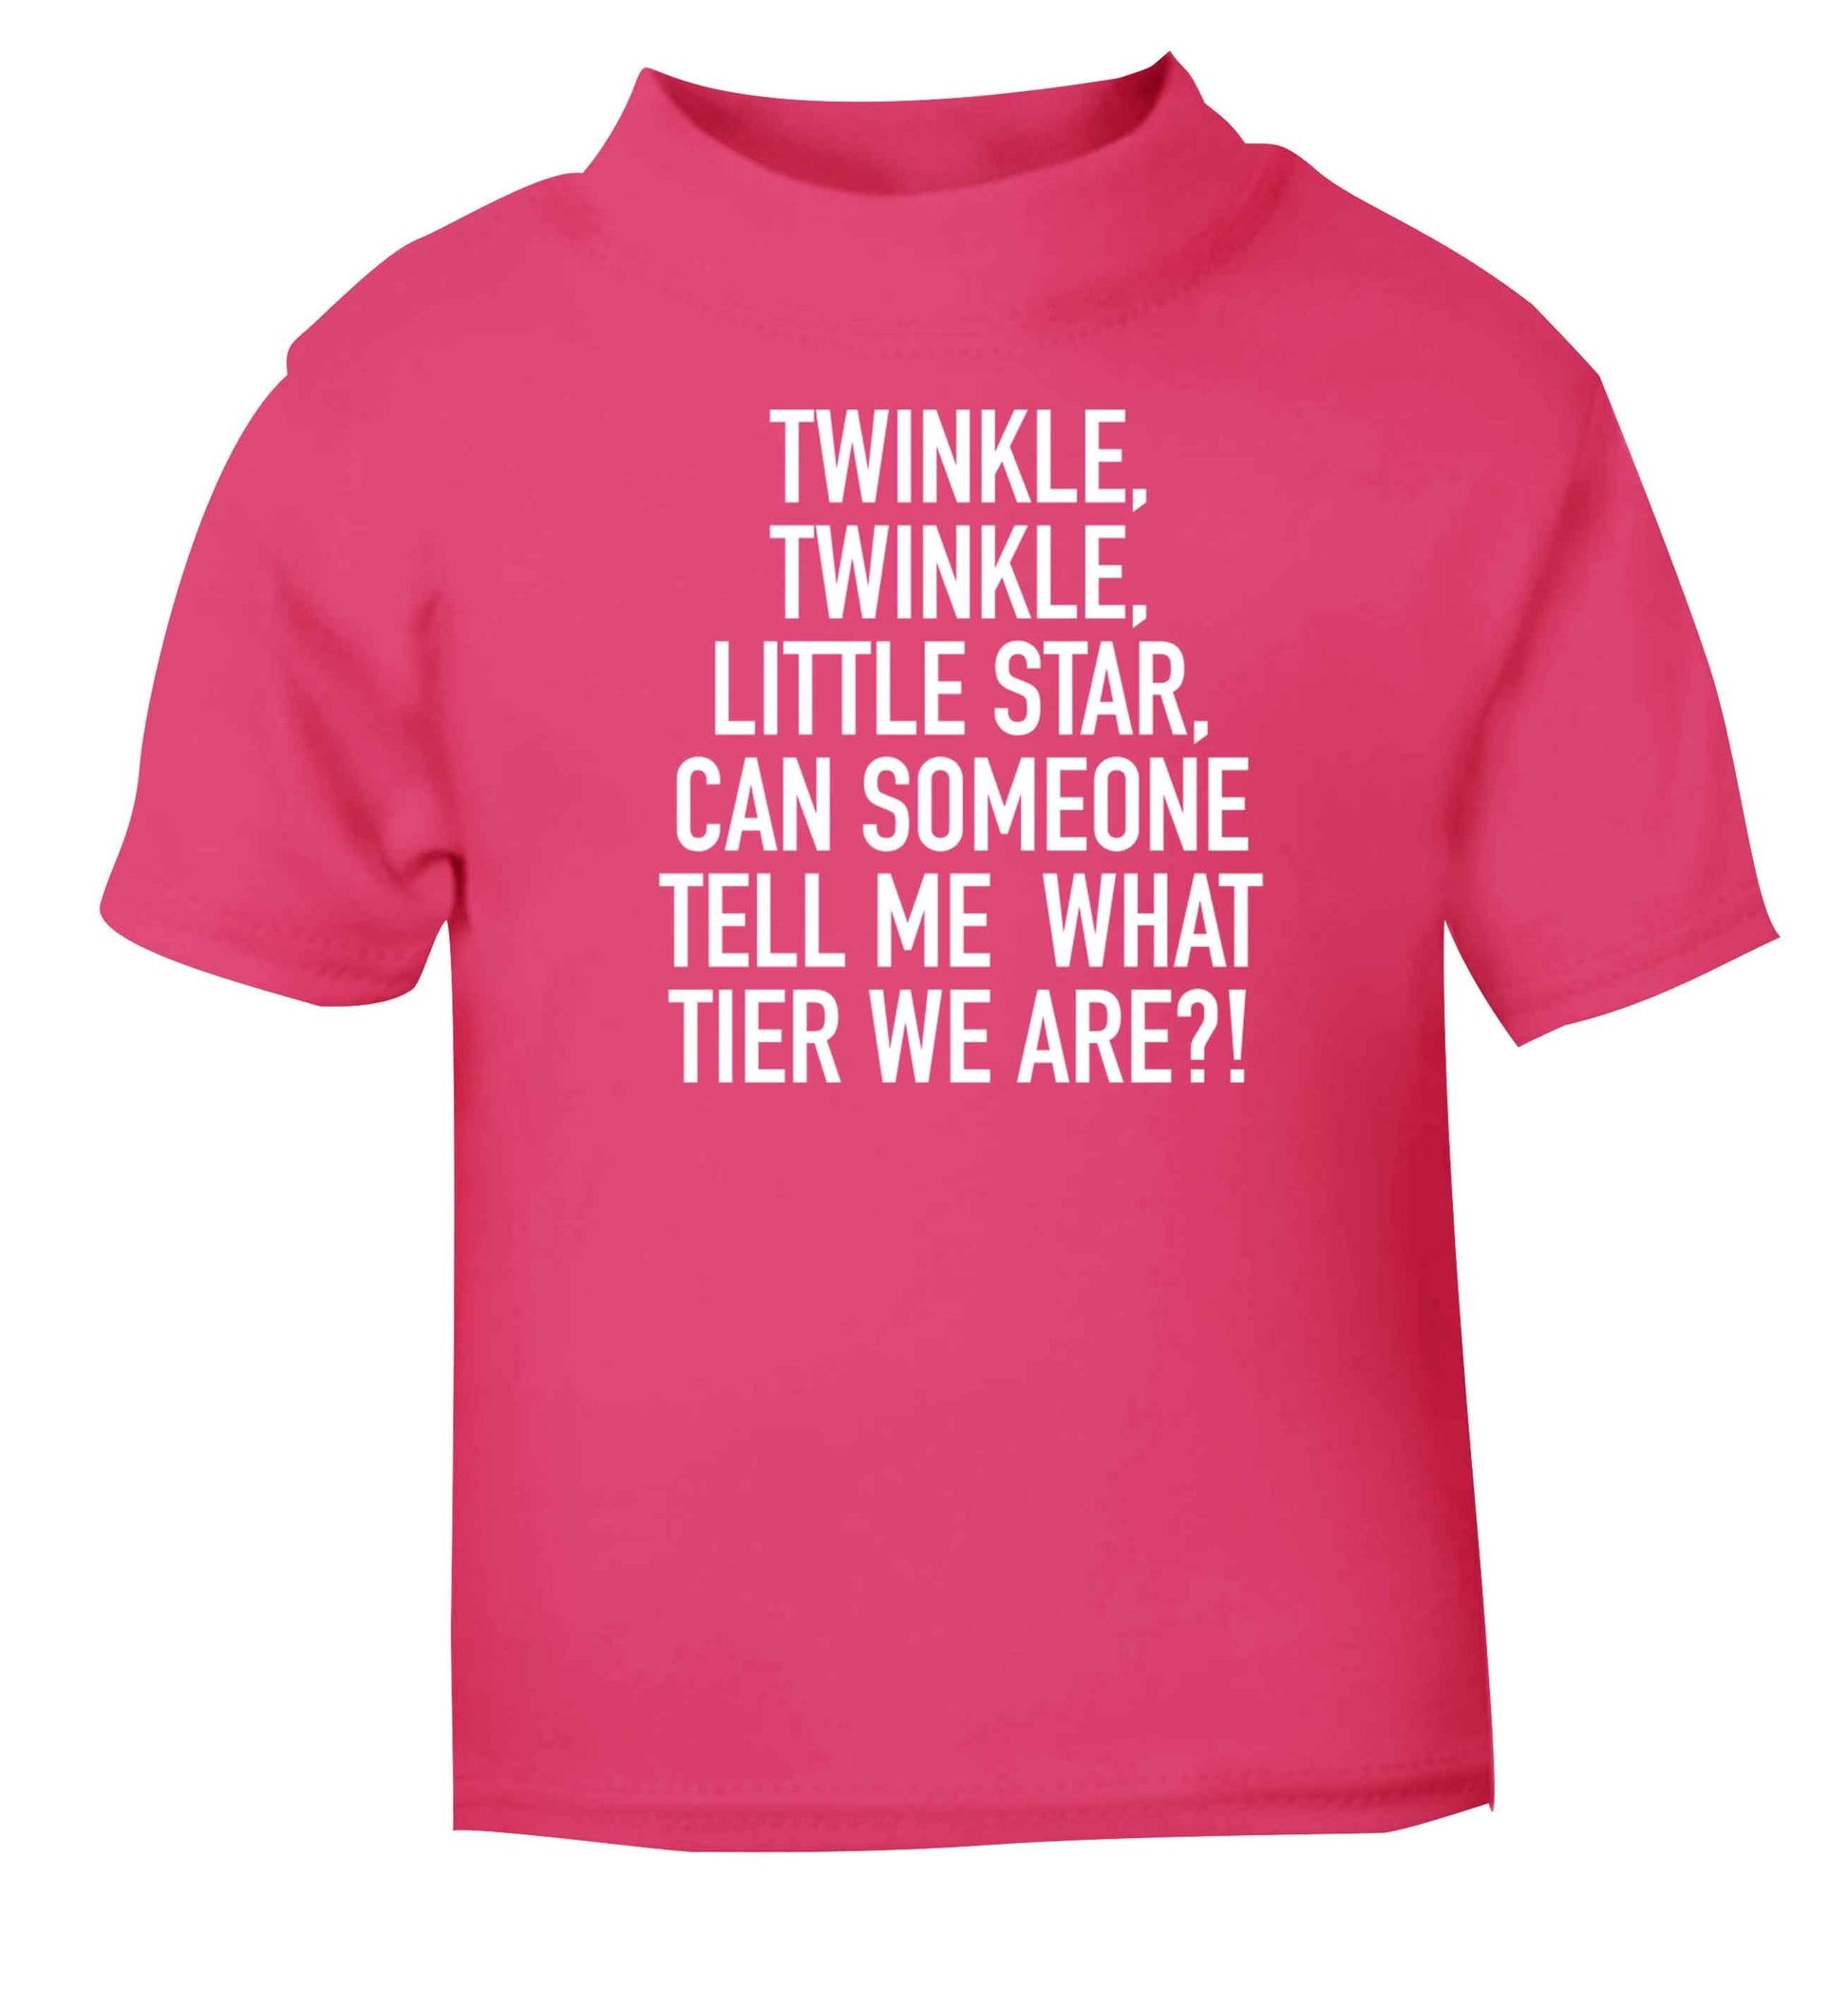 Twinkle twinkle, little star does anyone know what tier we are? pink baby toddler Tshirt 2 Years